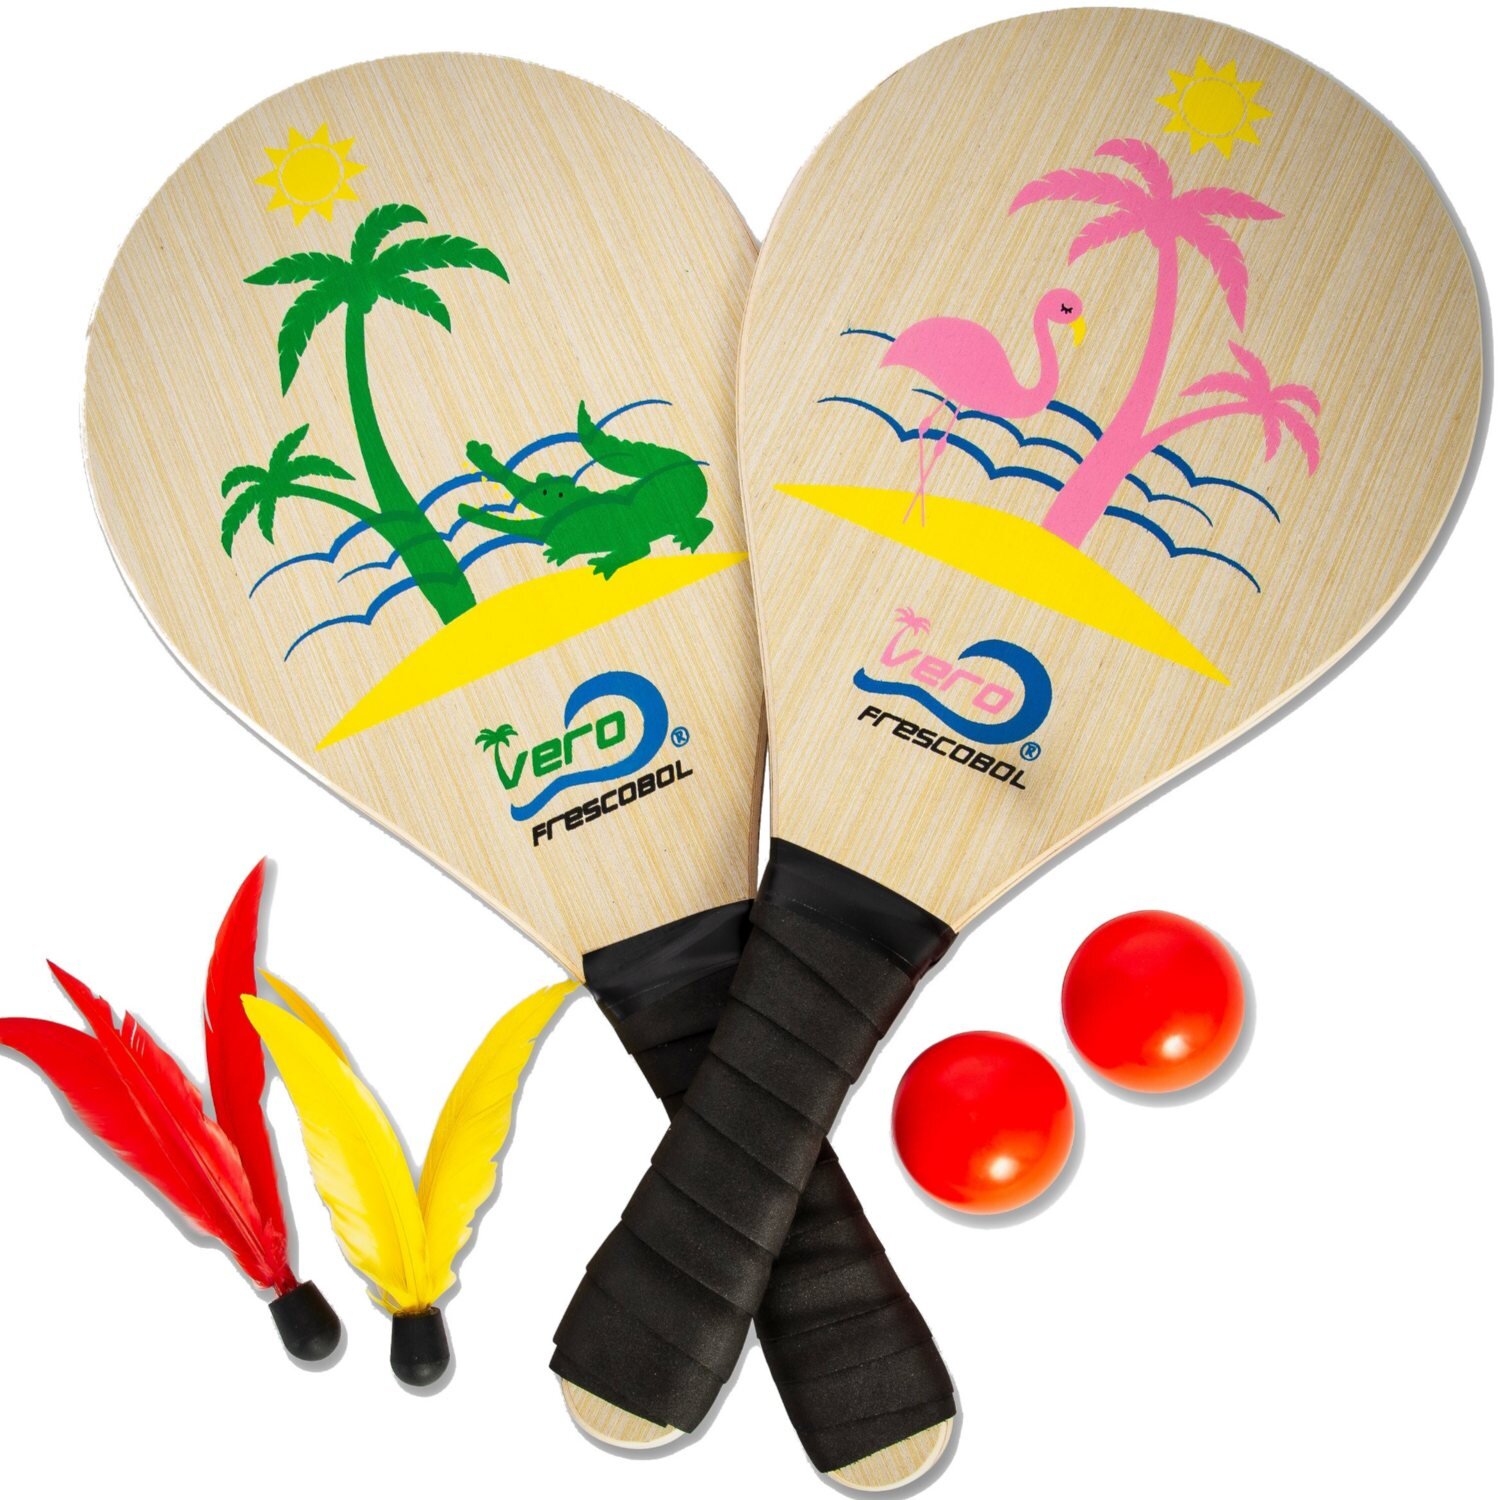 One Design Varies South Beach Outdoor Boom Paddle Bat and Ball Game Set 